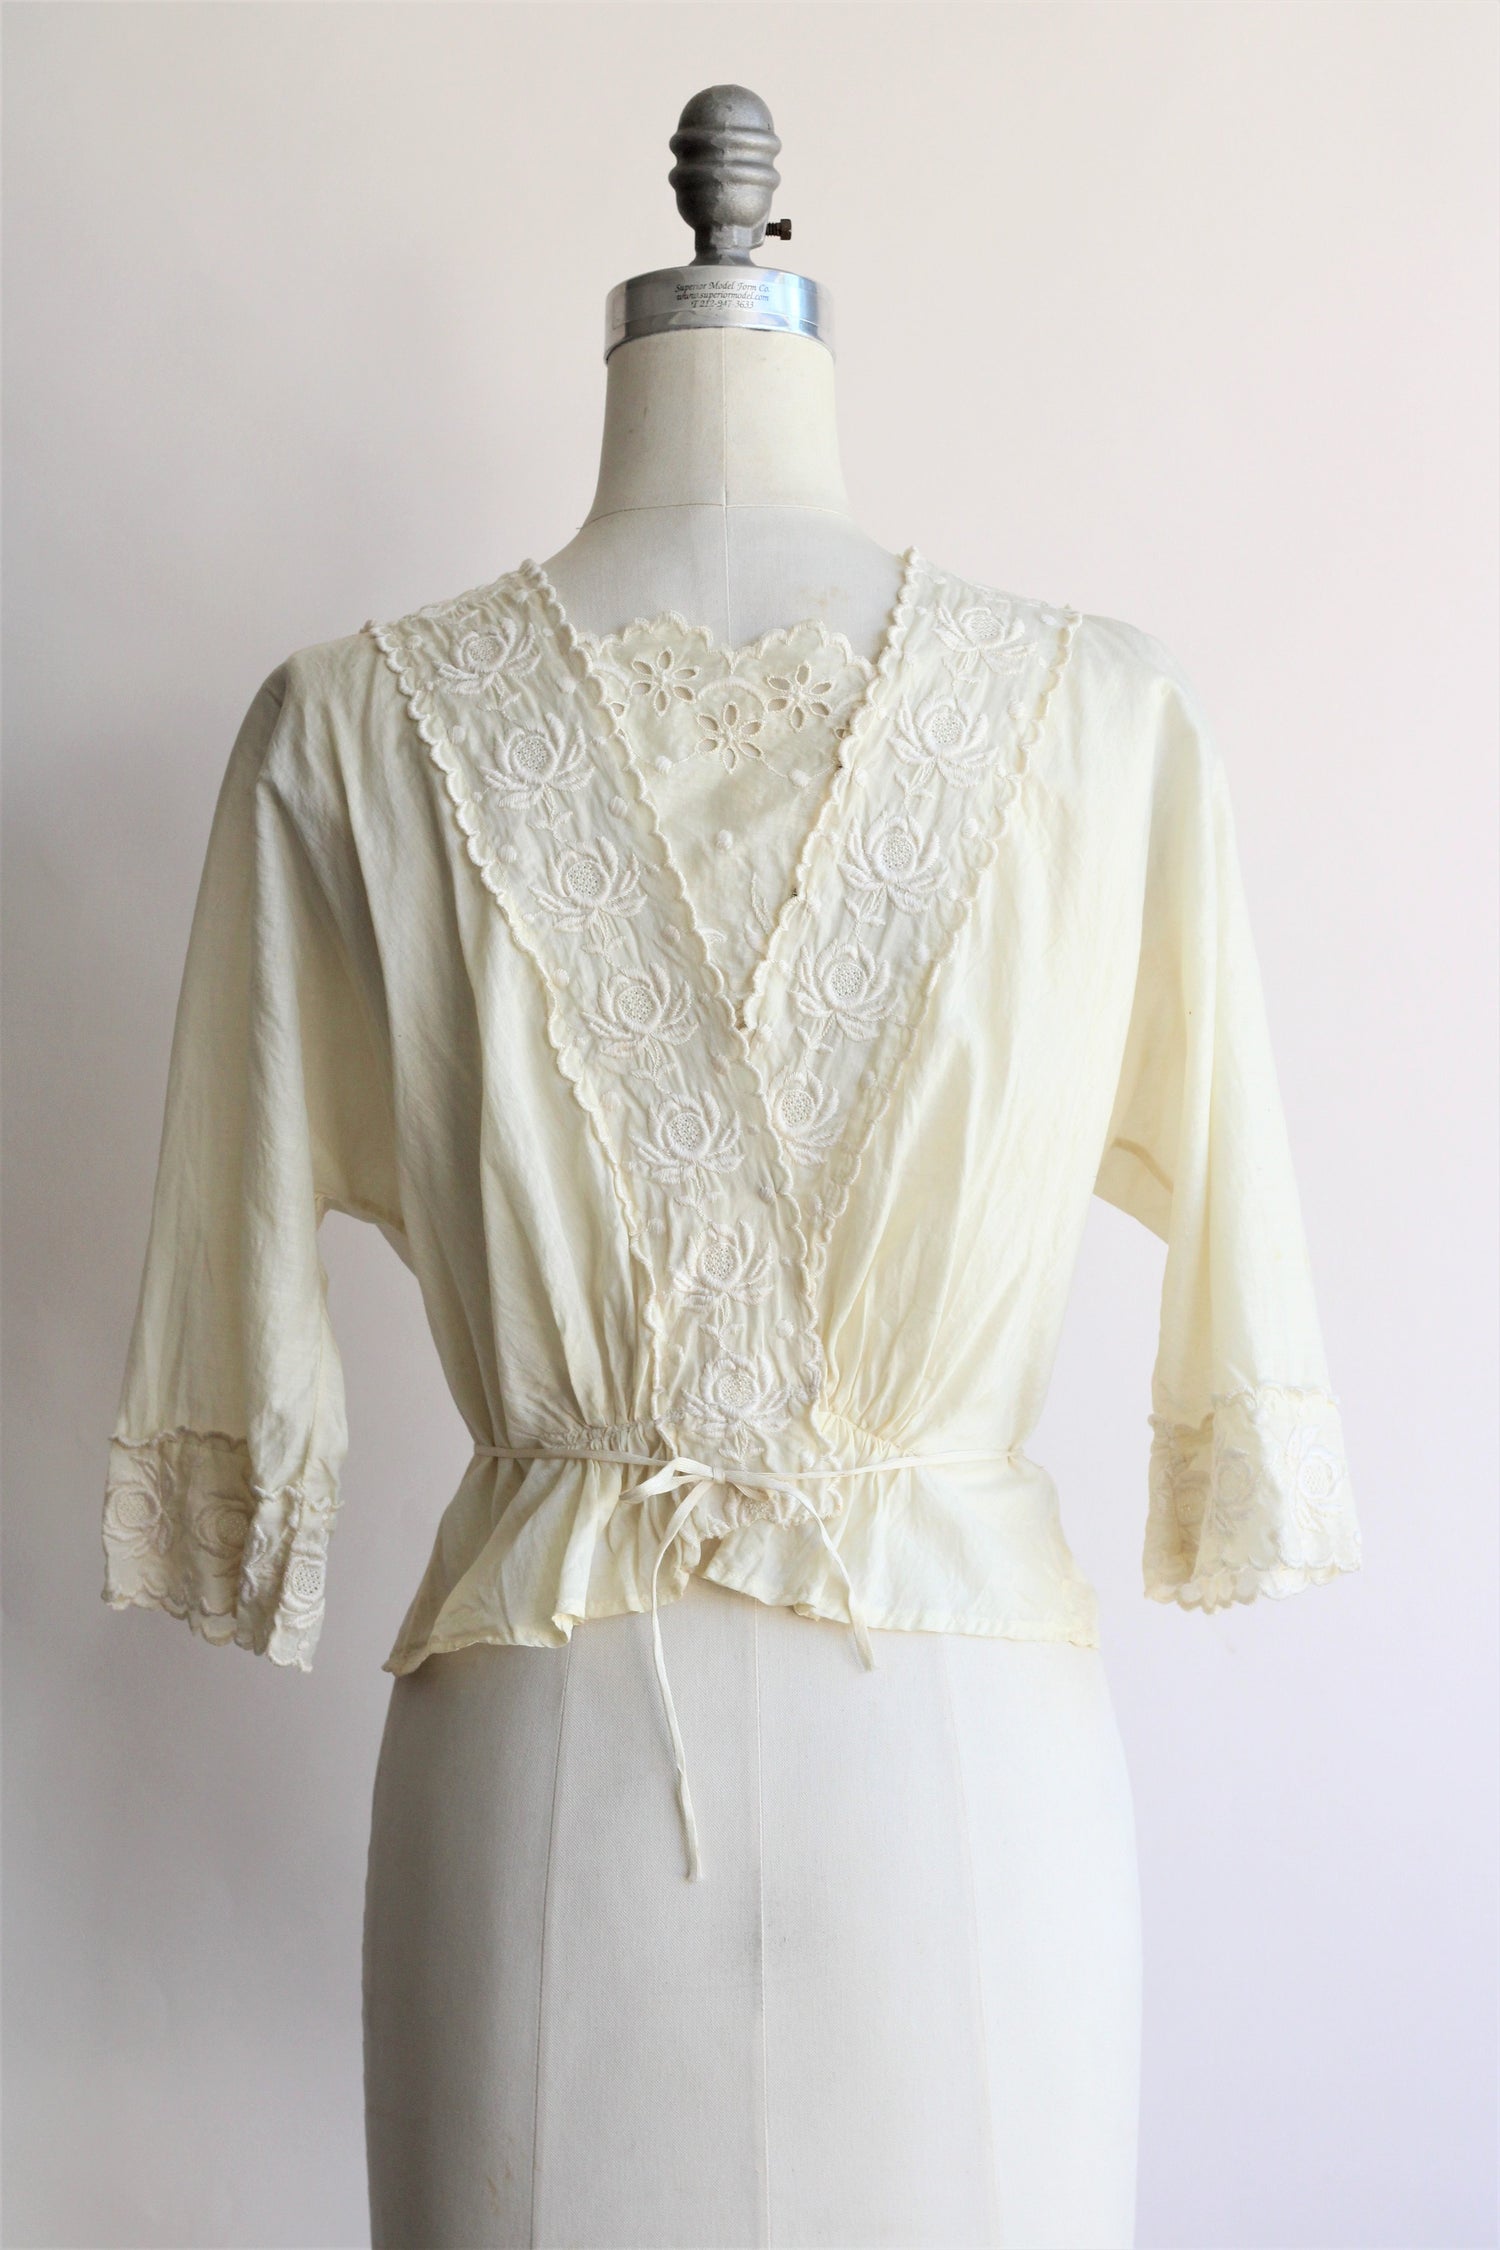 Vintage 1910s Edwardian Ivory Cotton Blouse With Embroidered Lace ...